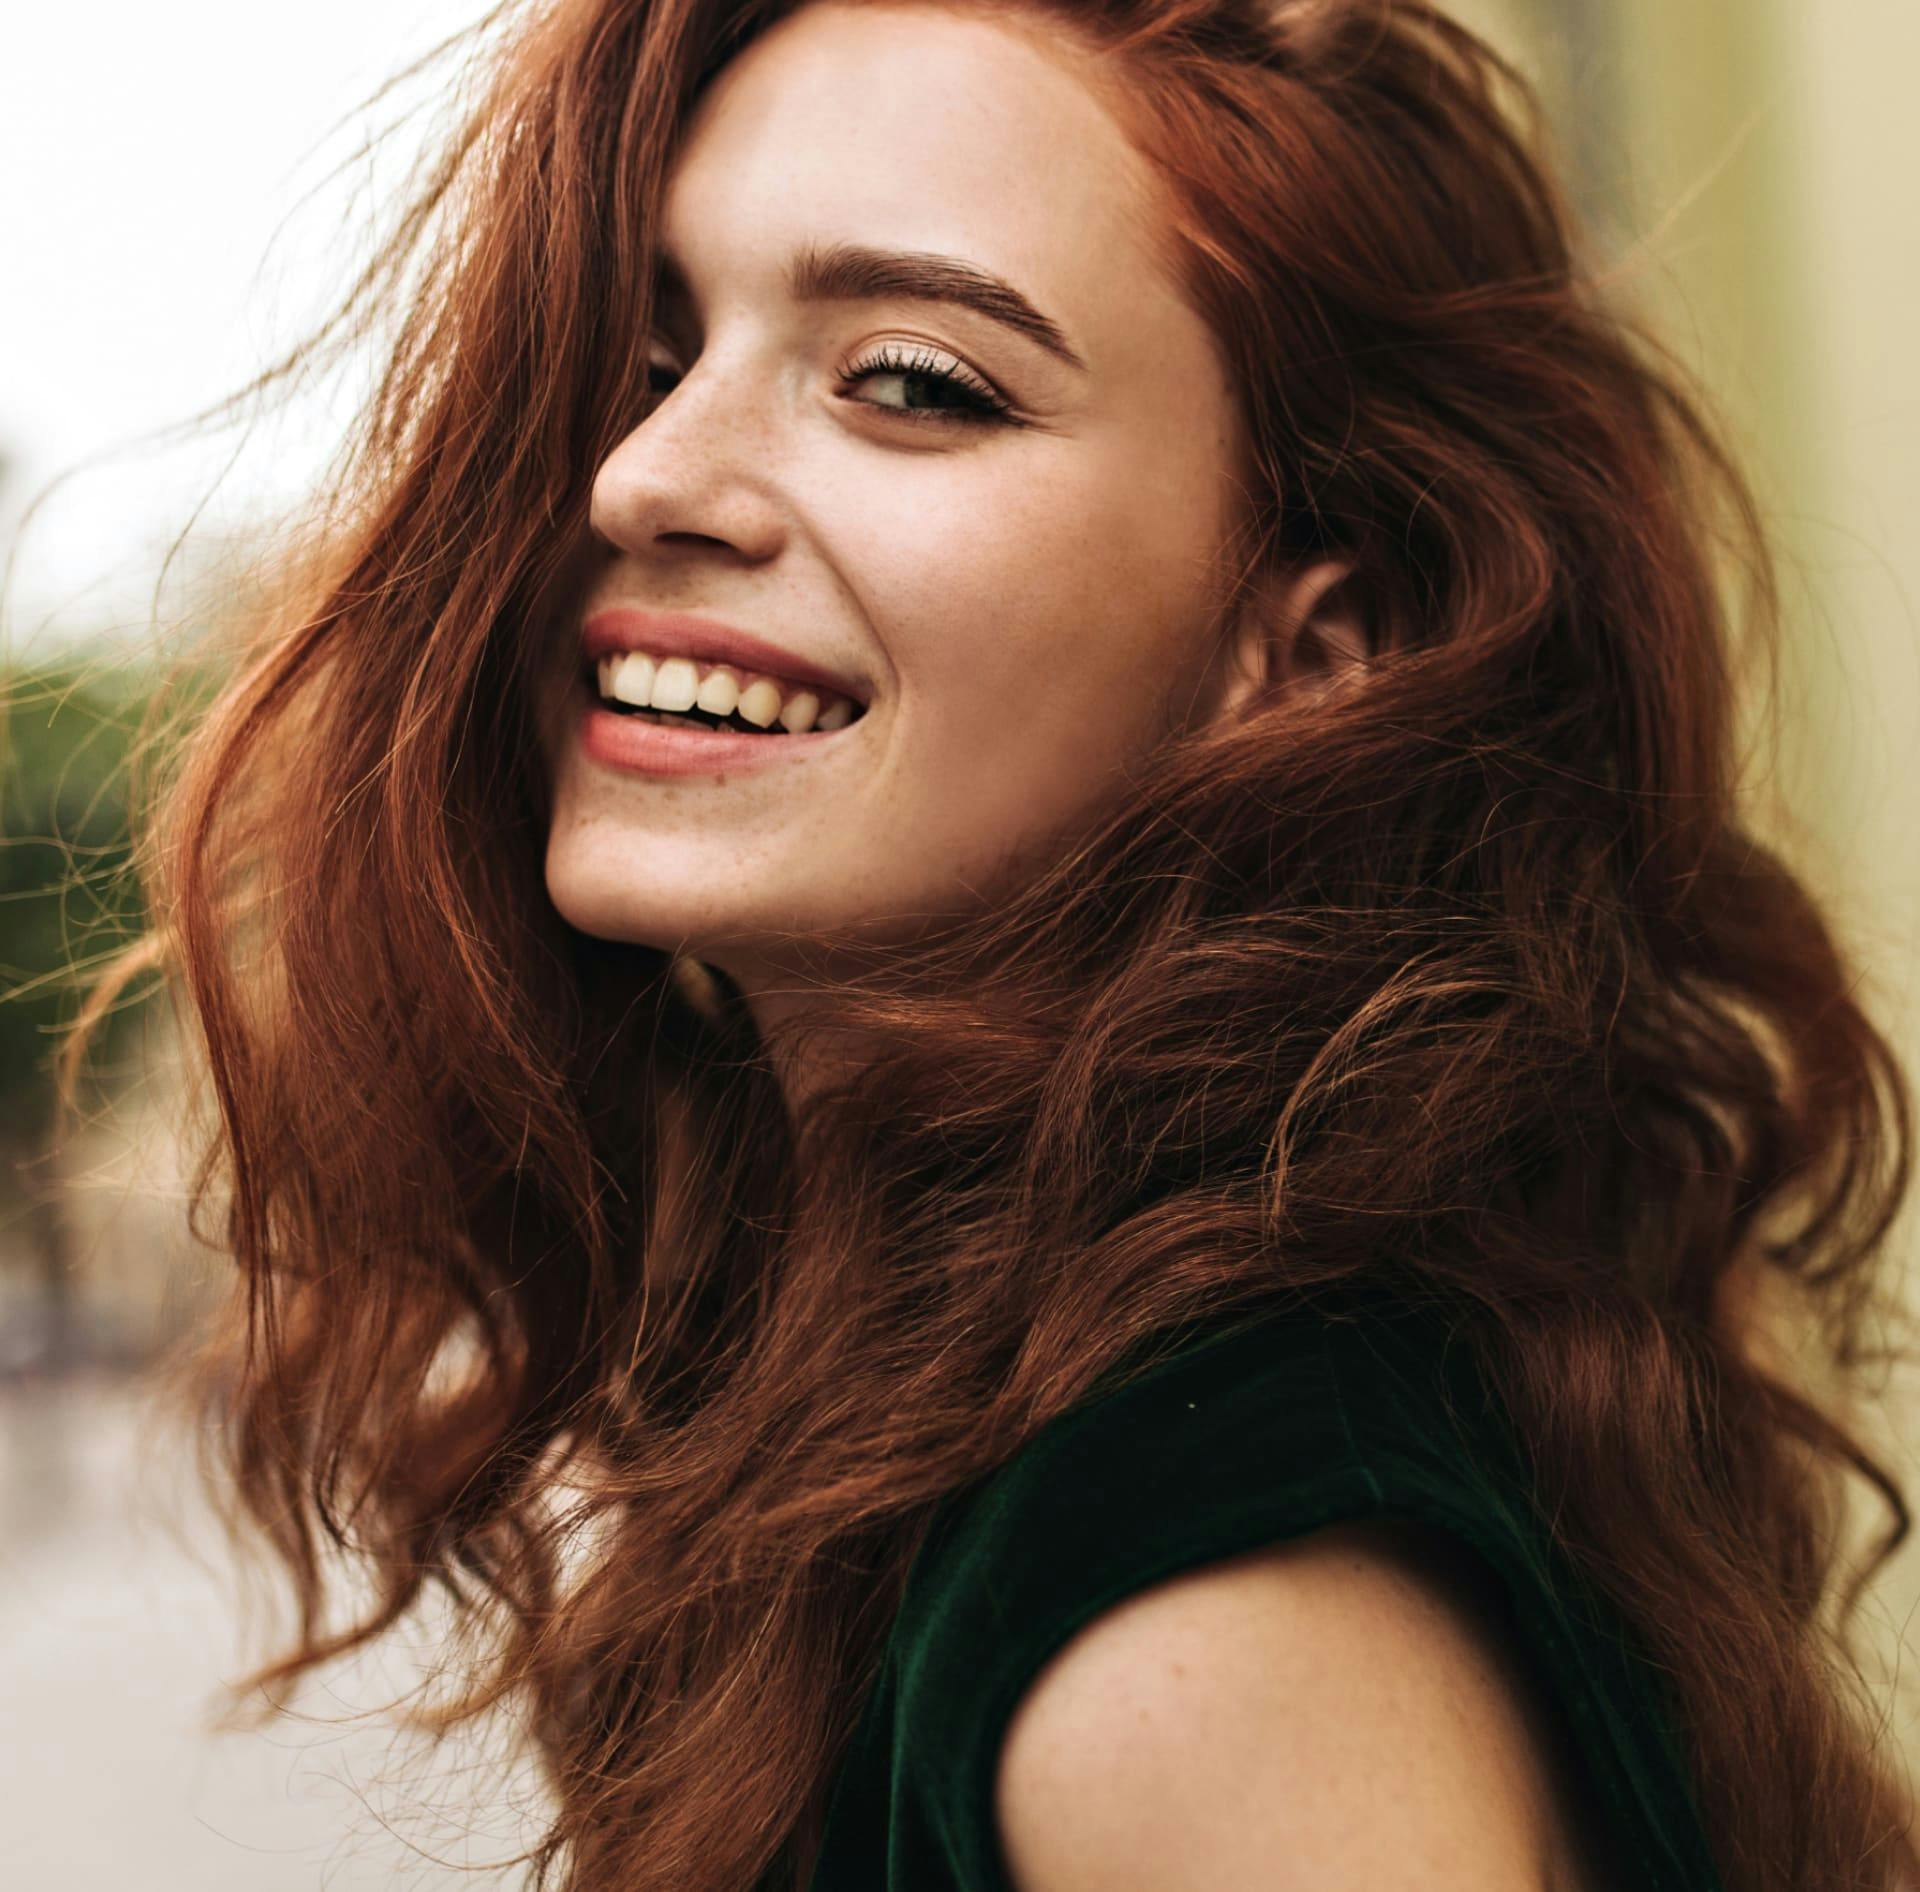 Woman with curly dark red hair smiling